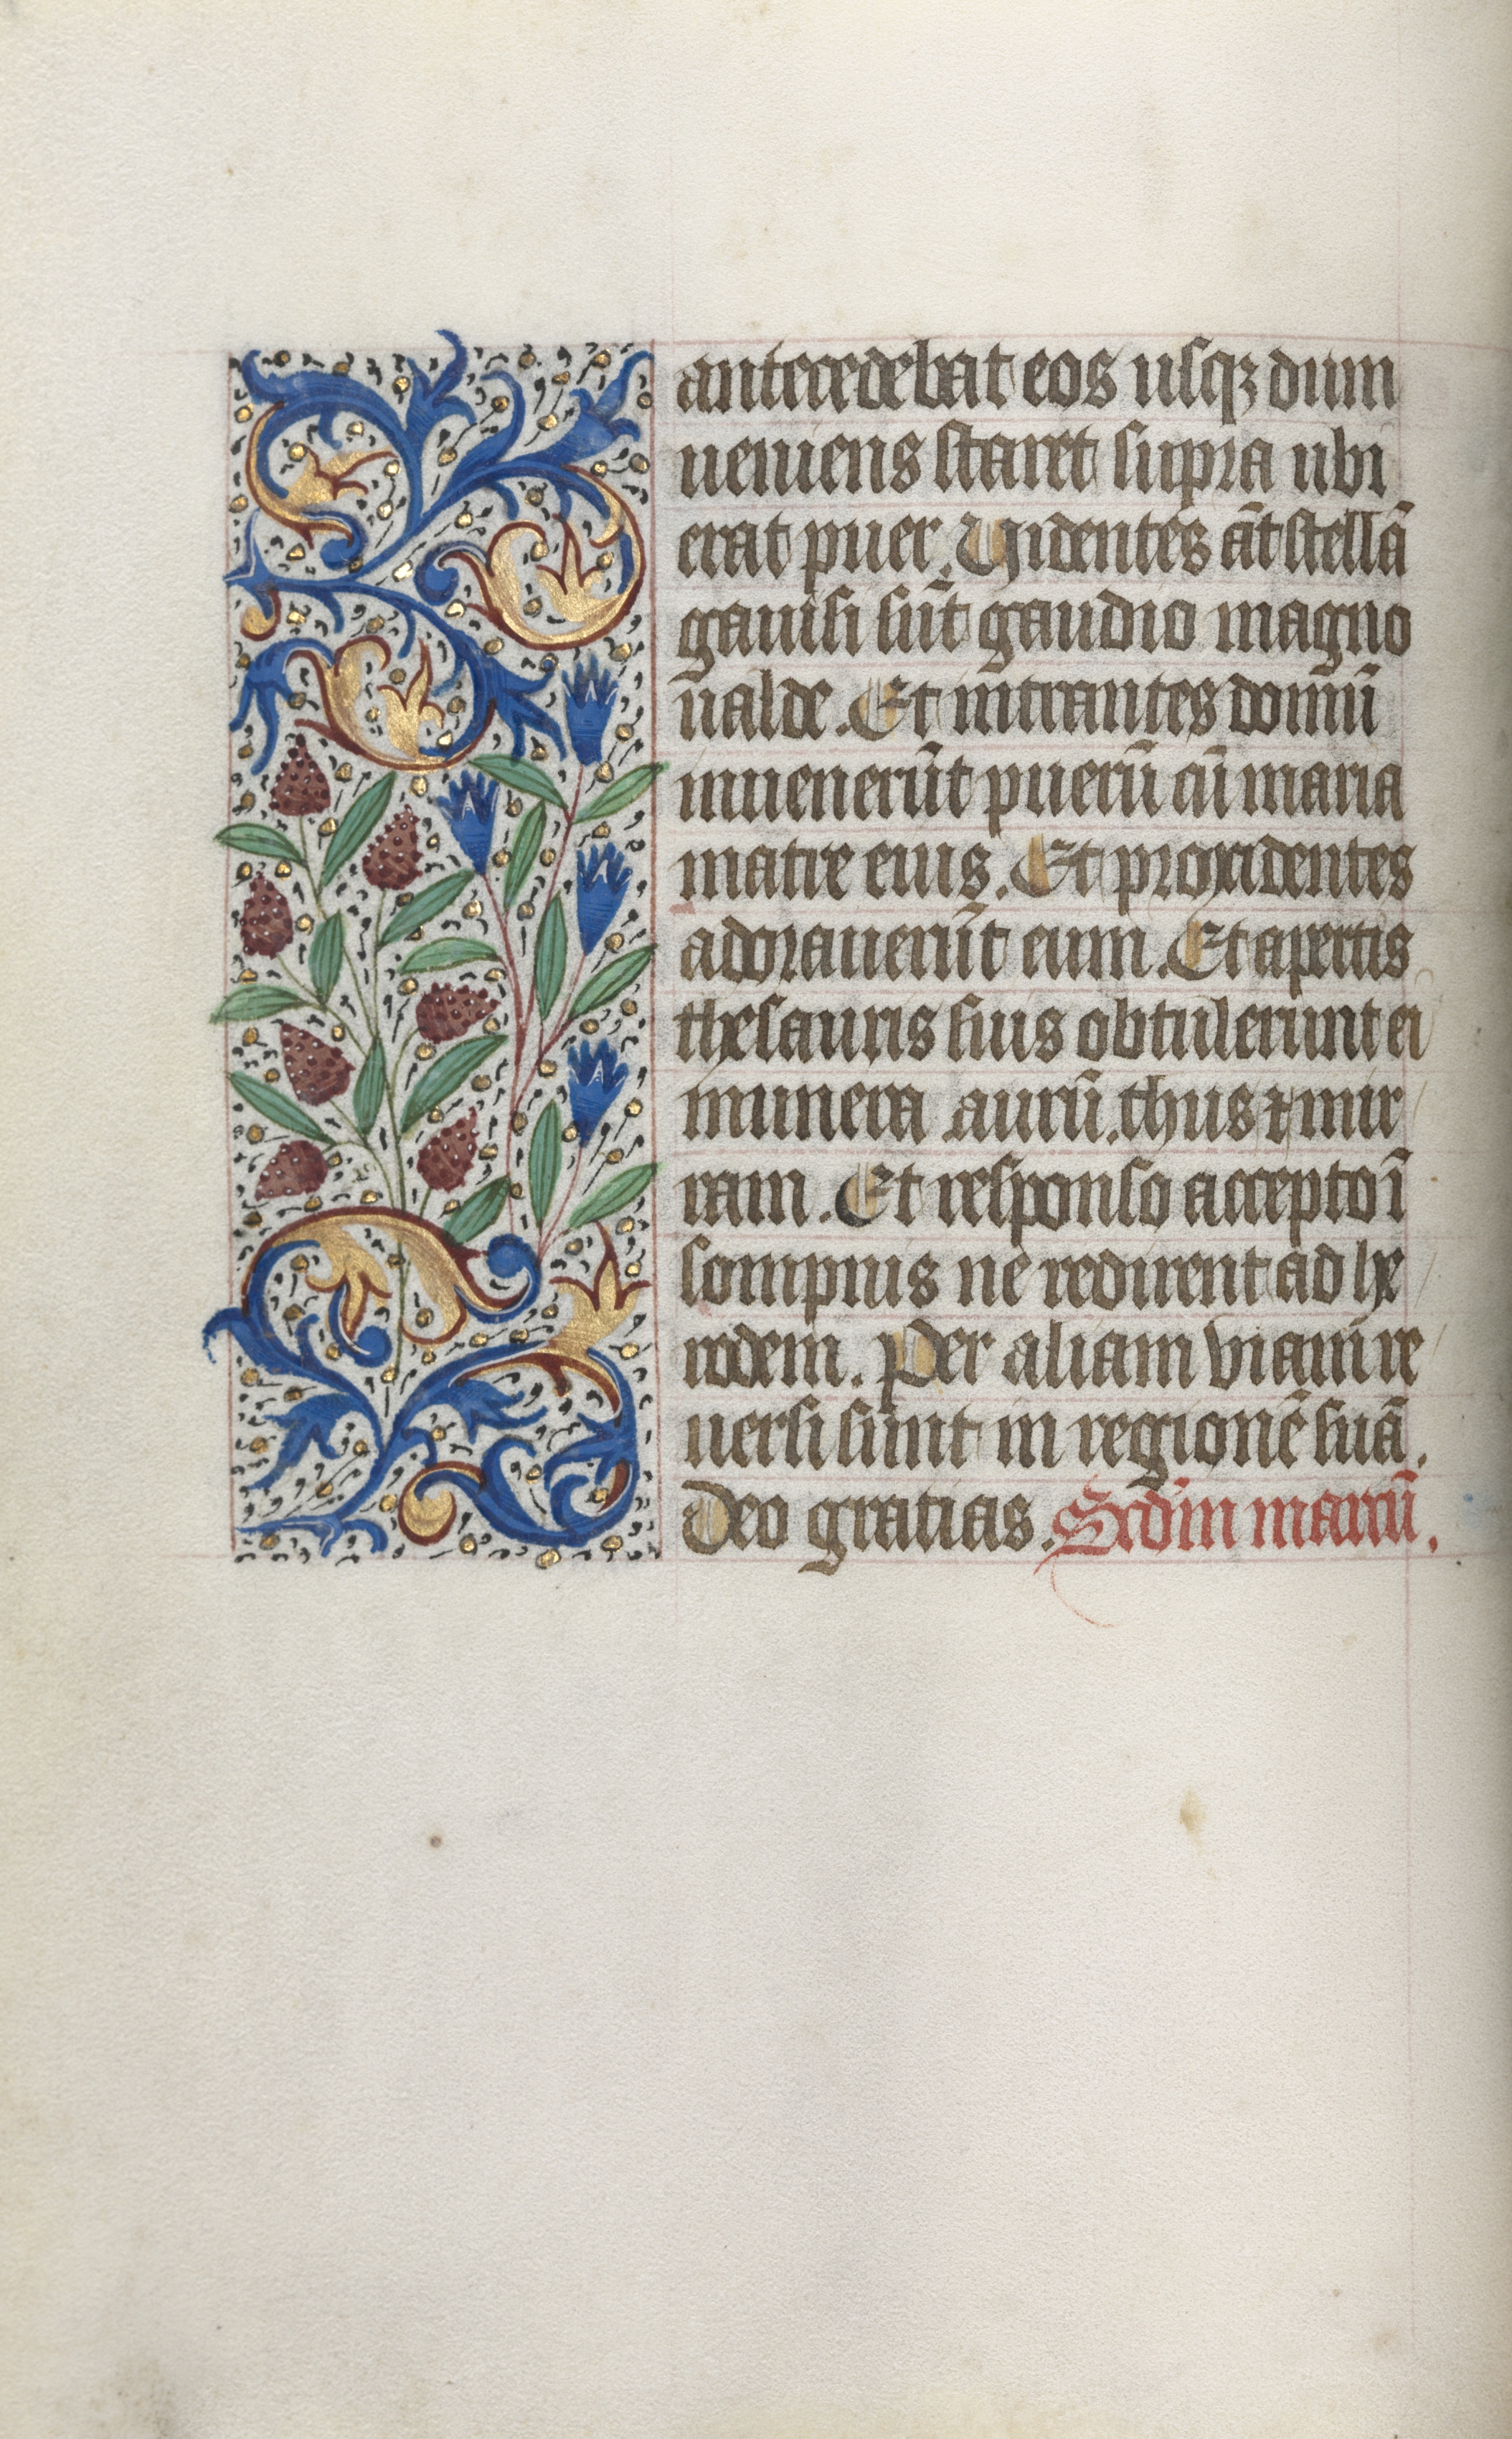 Book of Hours (Use of Rouen): fol. 17v